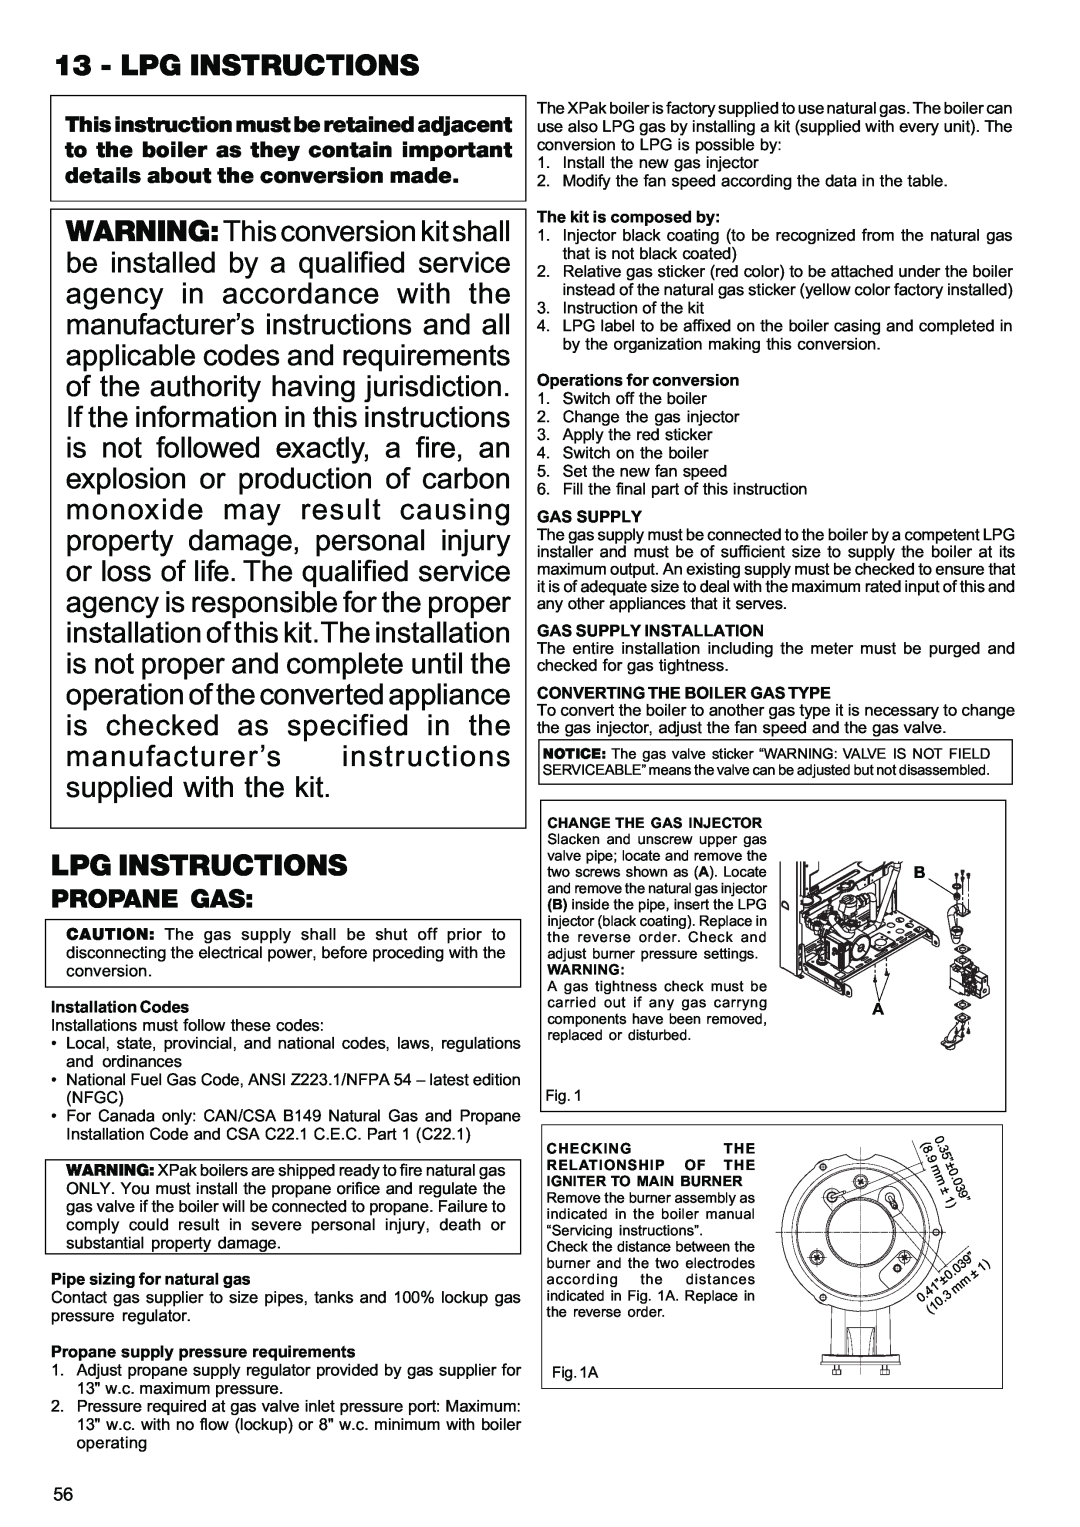 Raypak 85, 120 manual Lpg Instructions, Propane Gas, manufacturer’s instructions supplied with the kit 